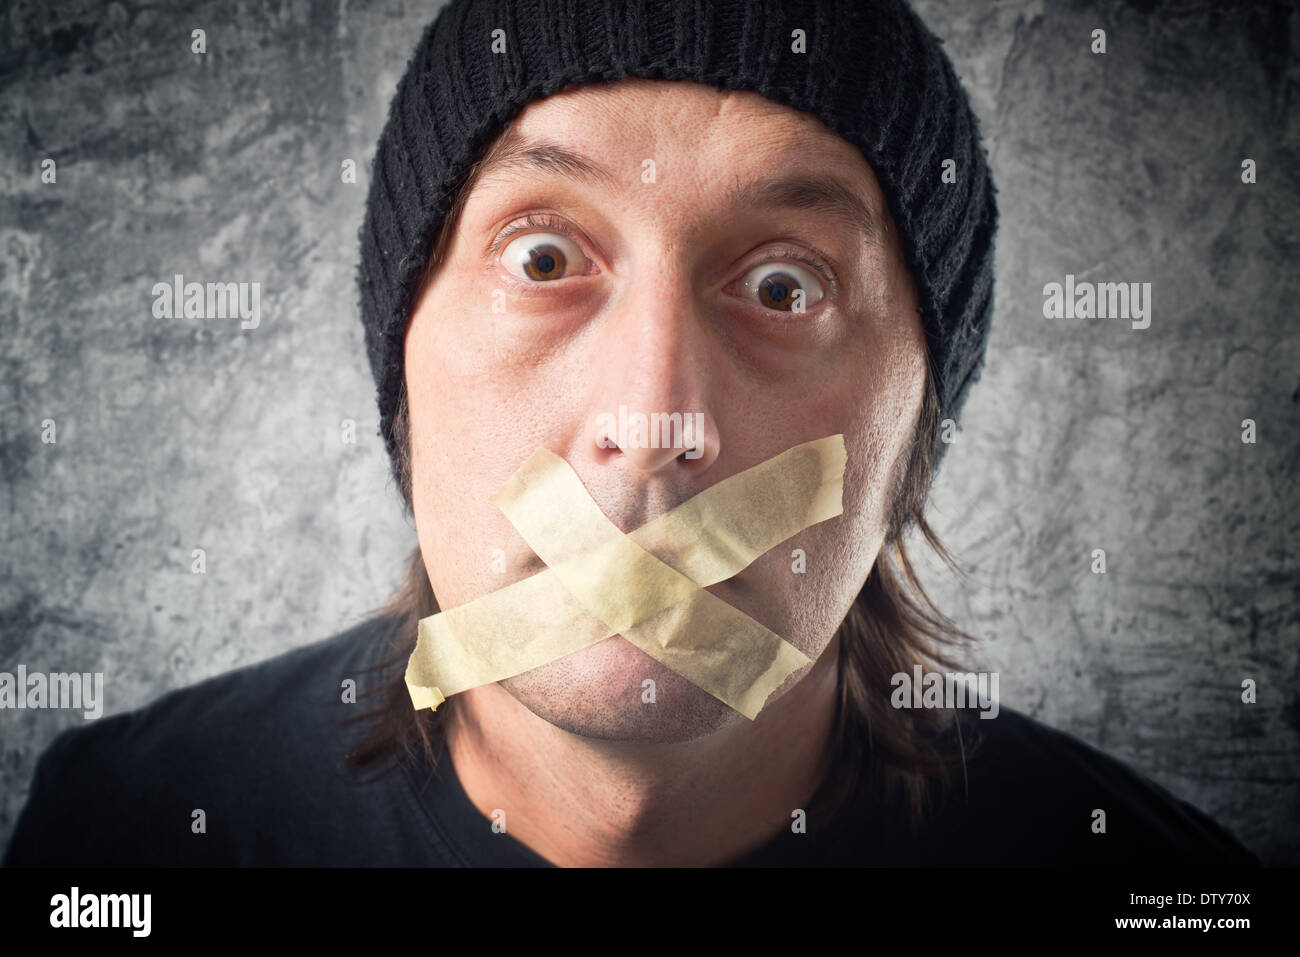 My lips are sealed. Casual Man with black cap having tape over his mouth. Stock Photo